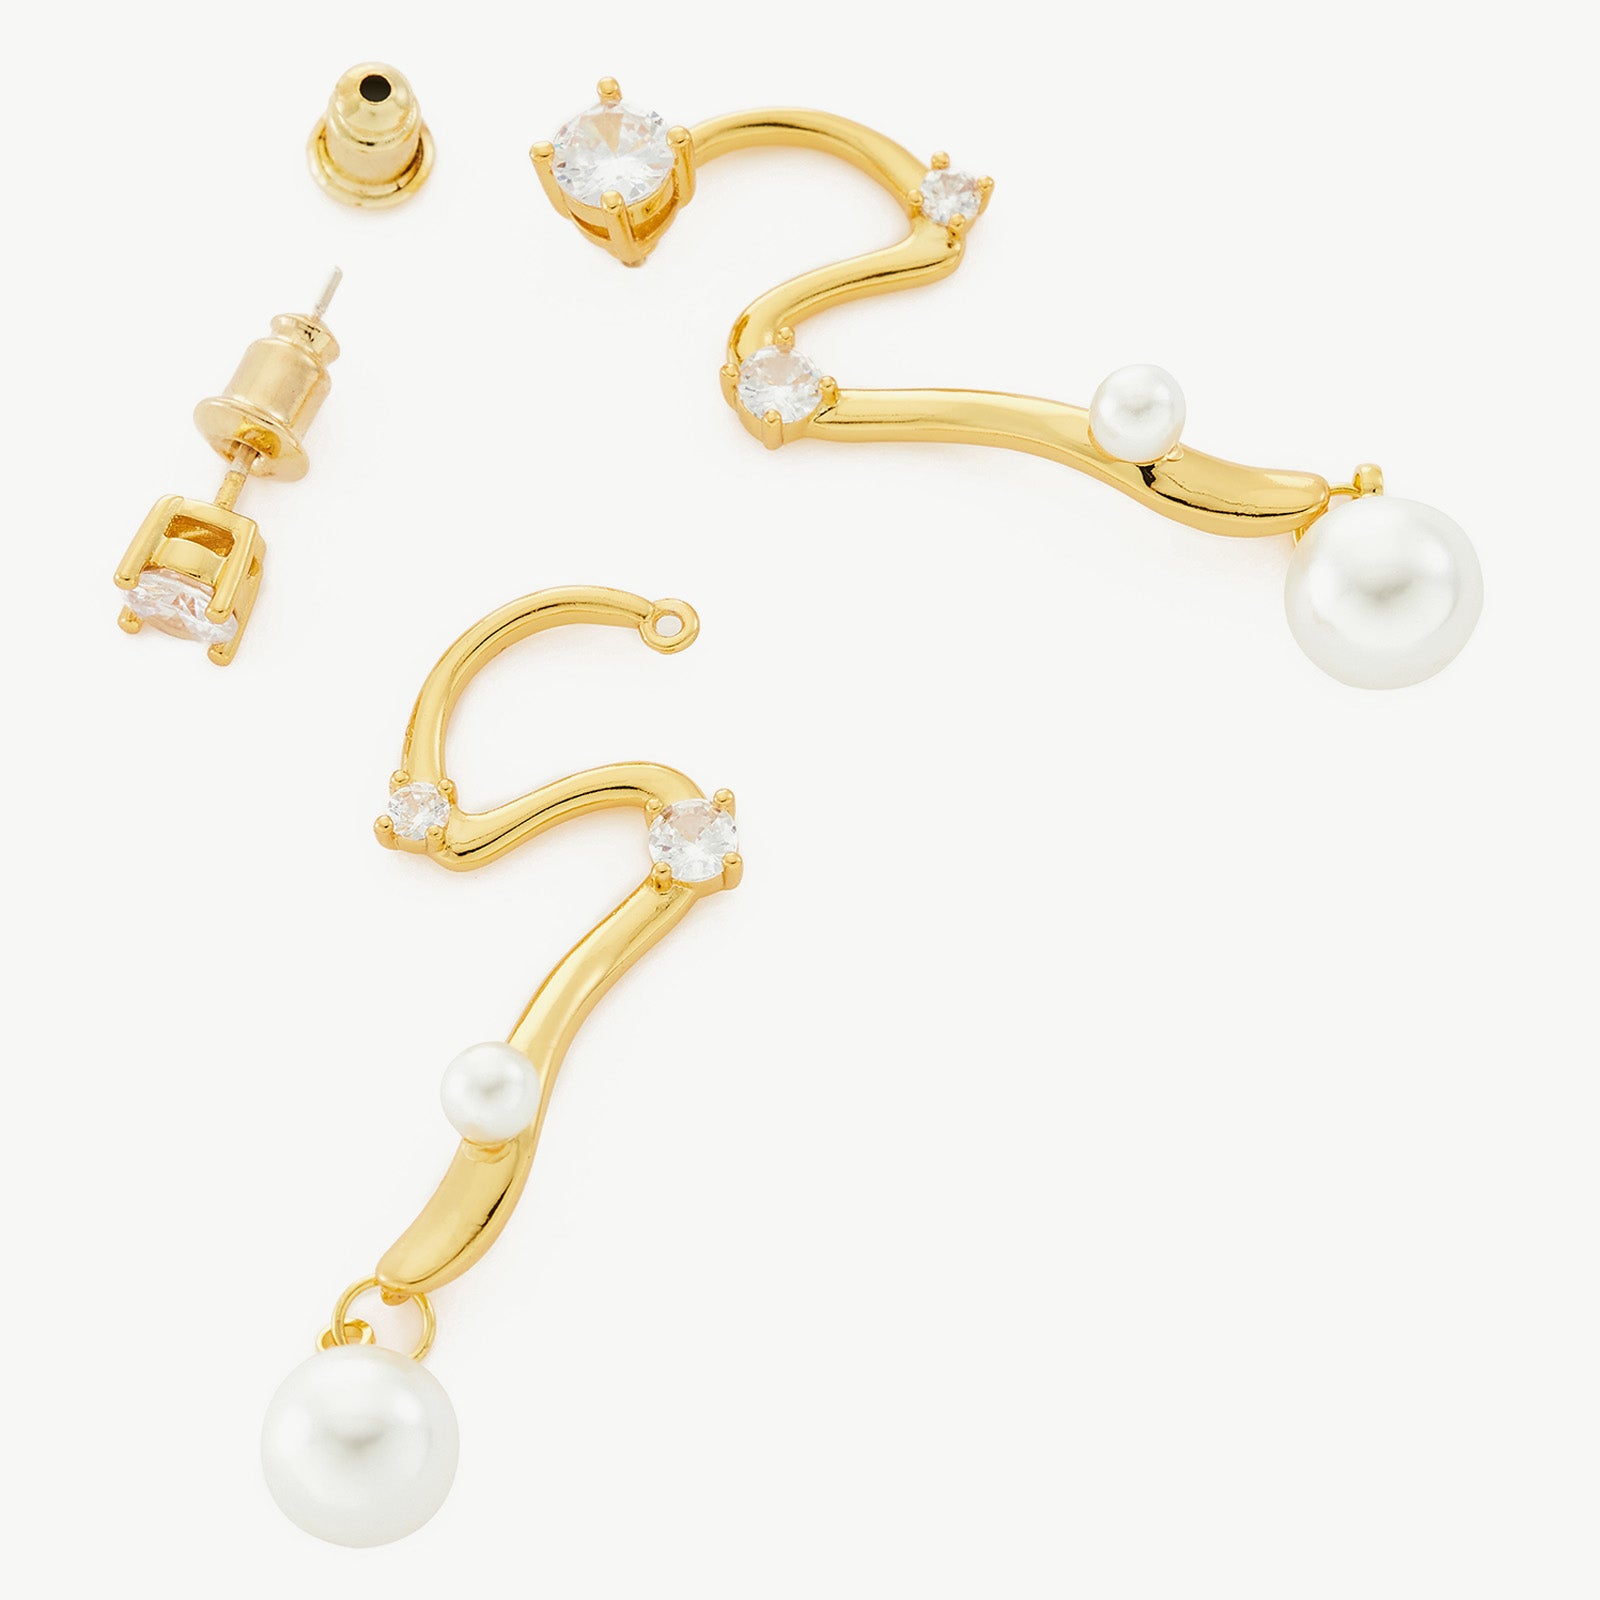 Serpent-Inspired Earrings with Pearl Drops, exuding grace with pearl-coiled serpents, these earrings combine classic elegance with a hint of edgy charm